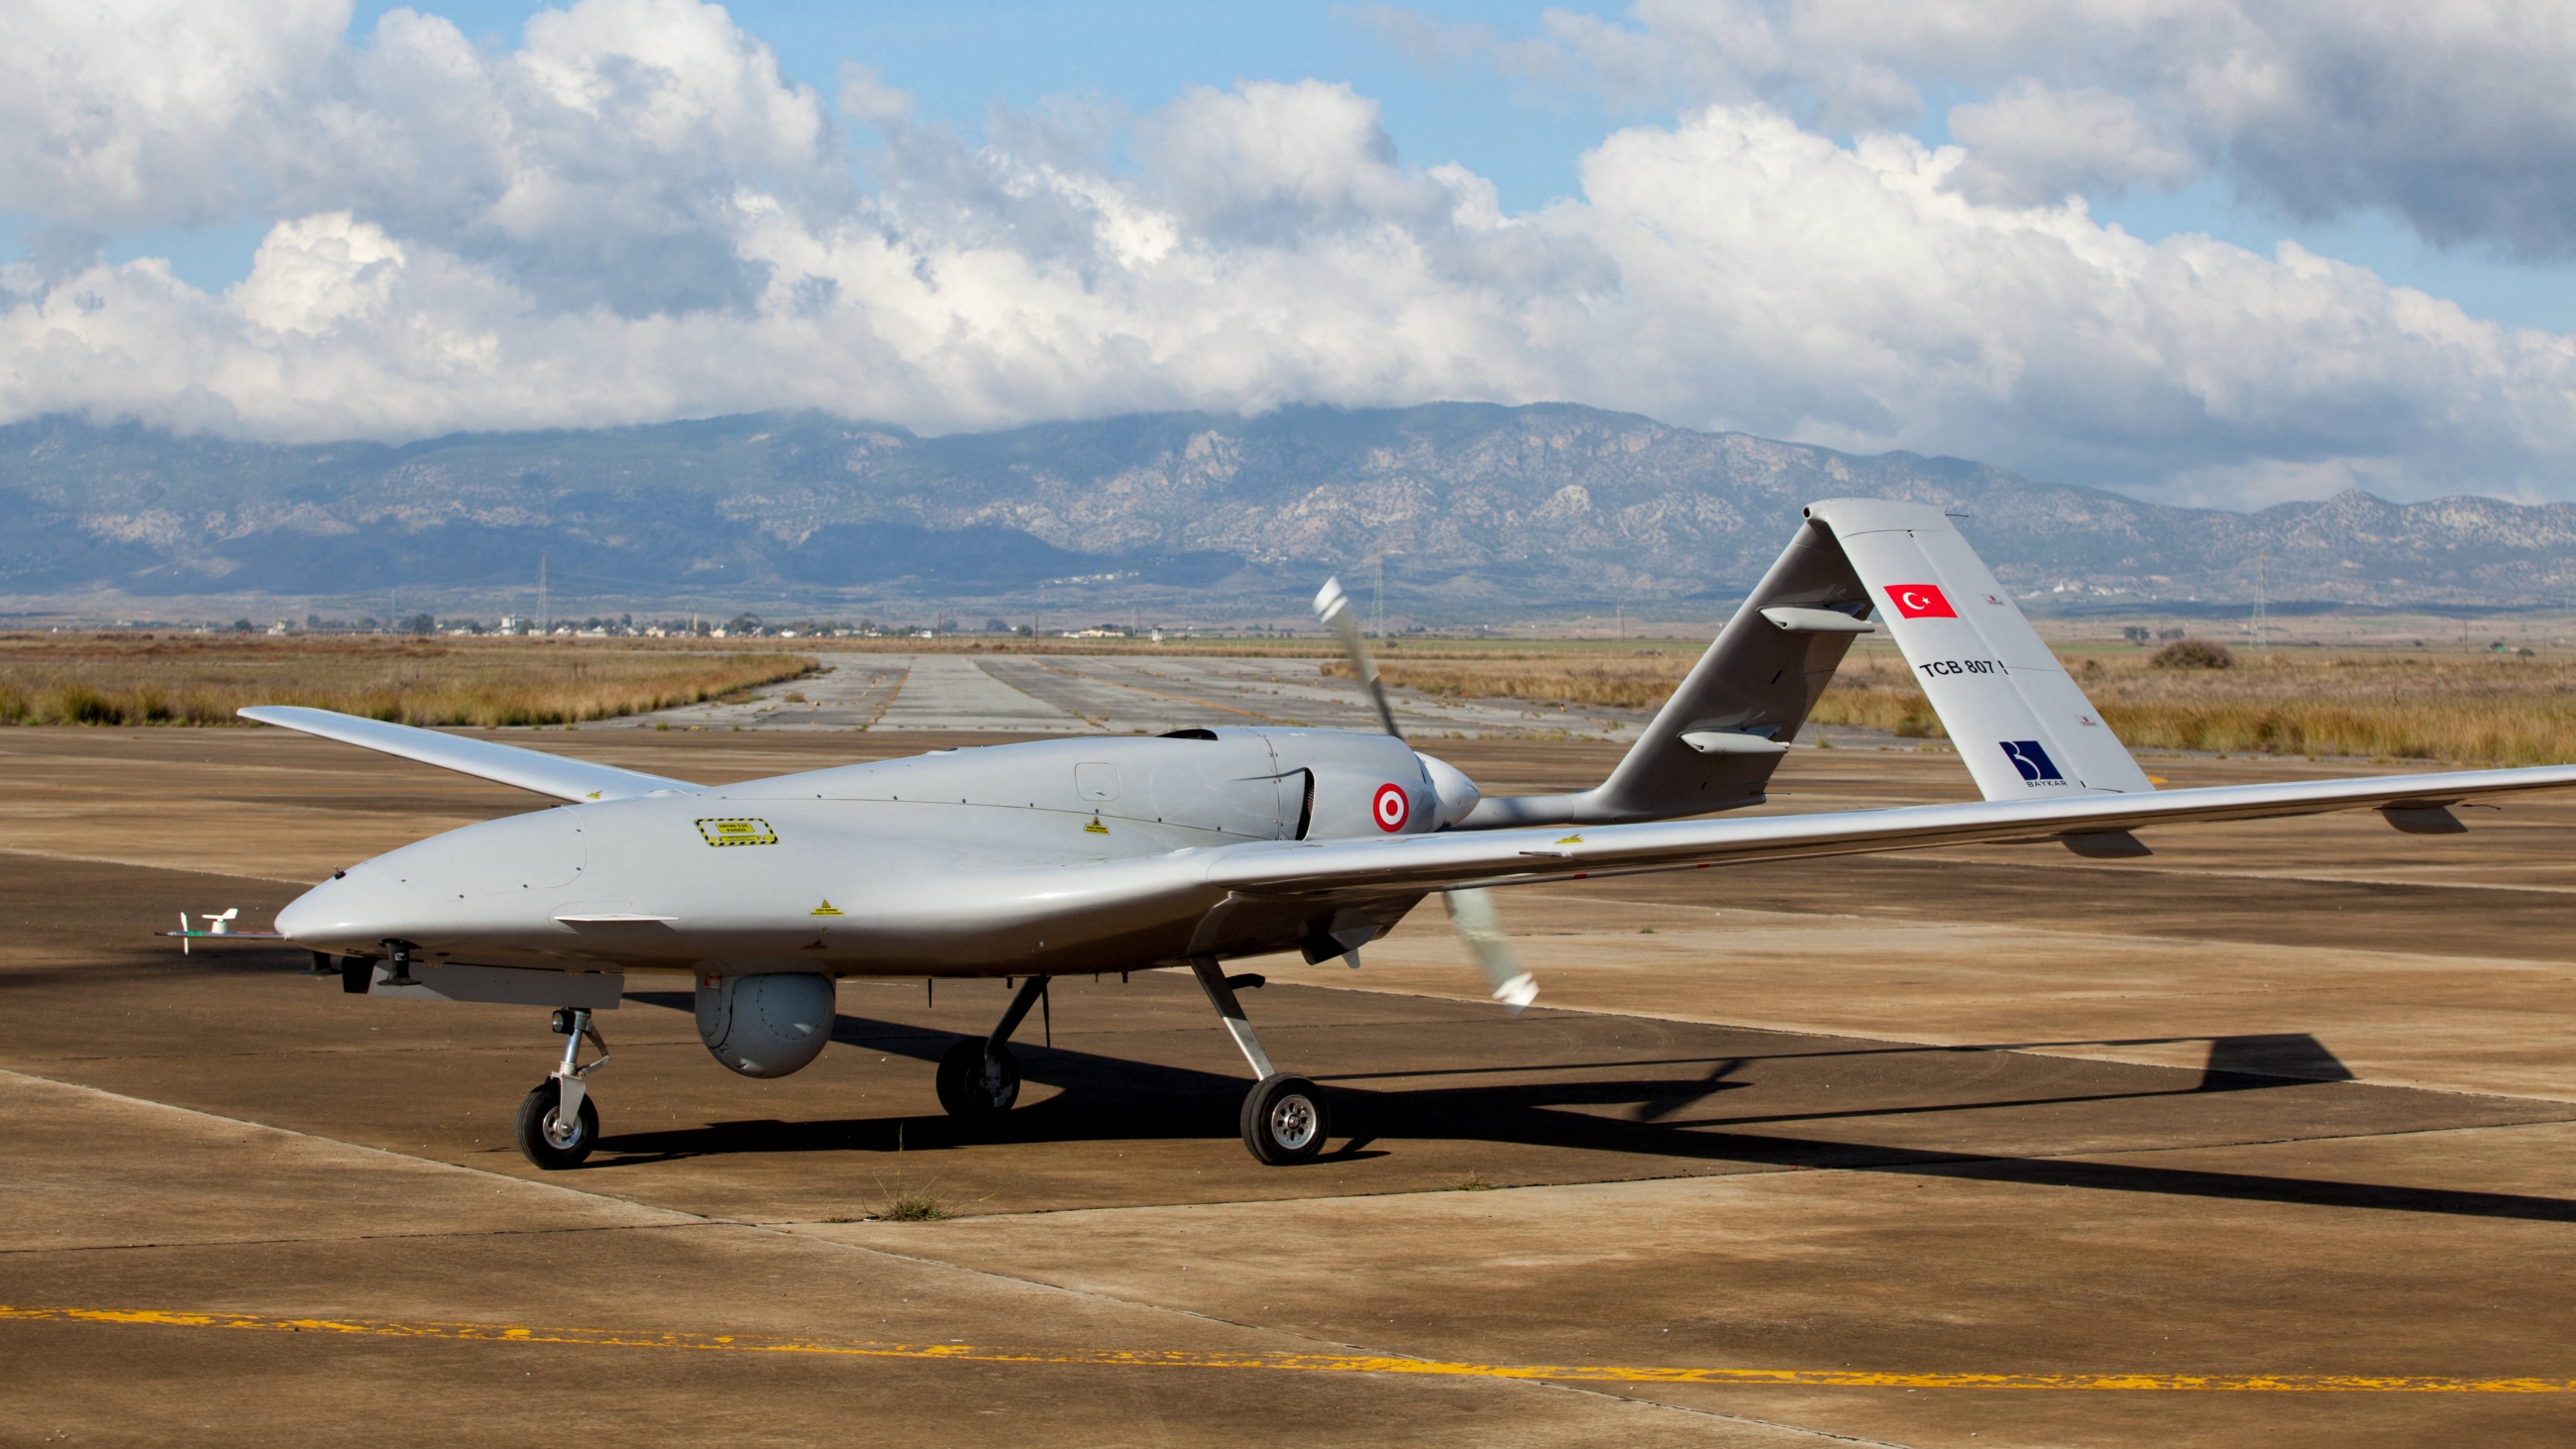 The Turkish-made Bayraktar TB2 drone is pictured at Gecitkale military airbase near Famagusta in the self-proclaimed Turkish Republic of Northern Cyprus, 16 December 2019 (AFP)